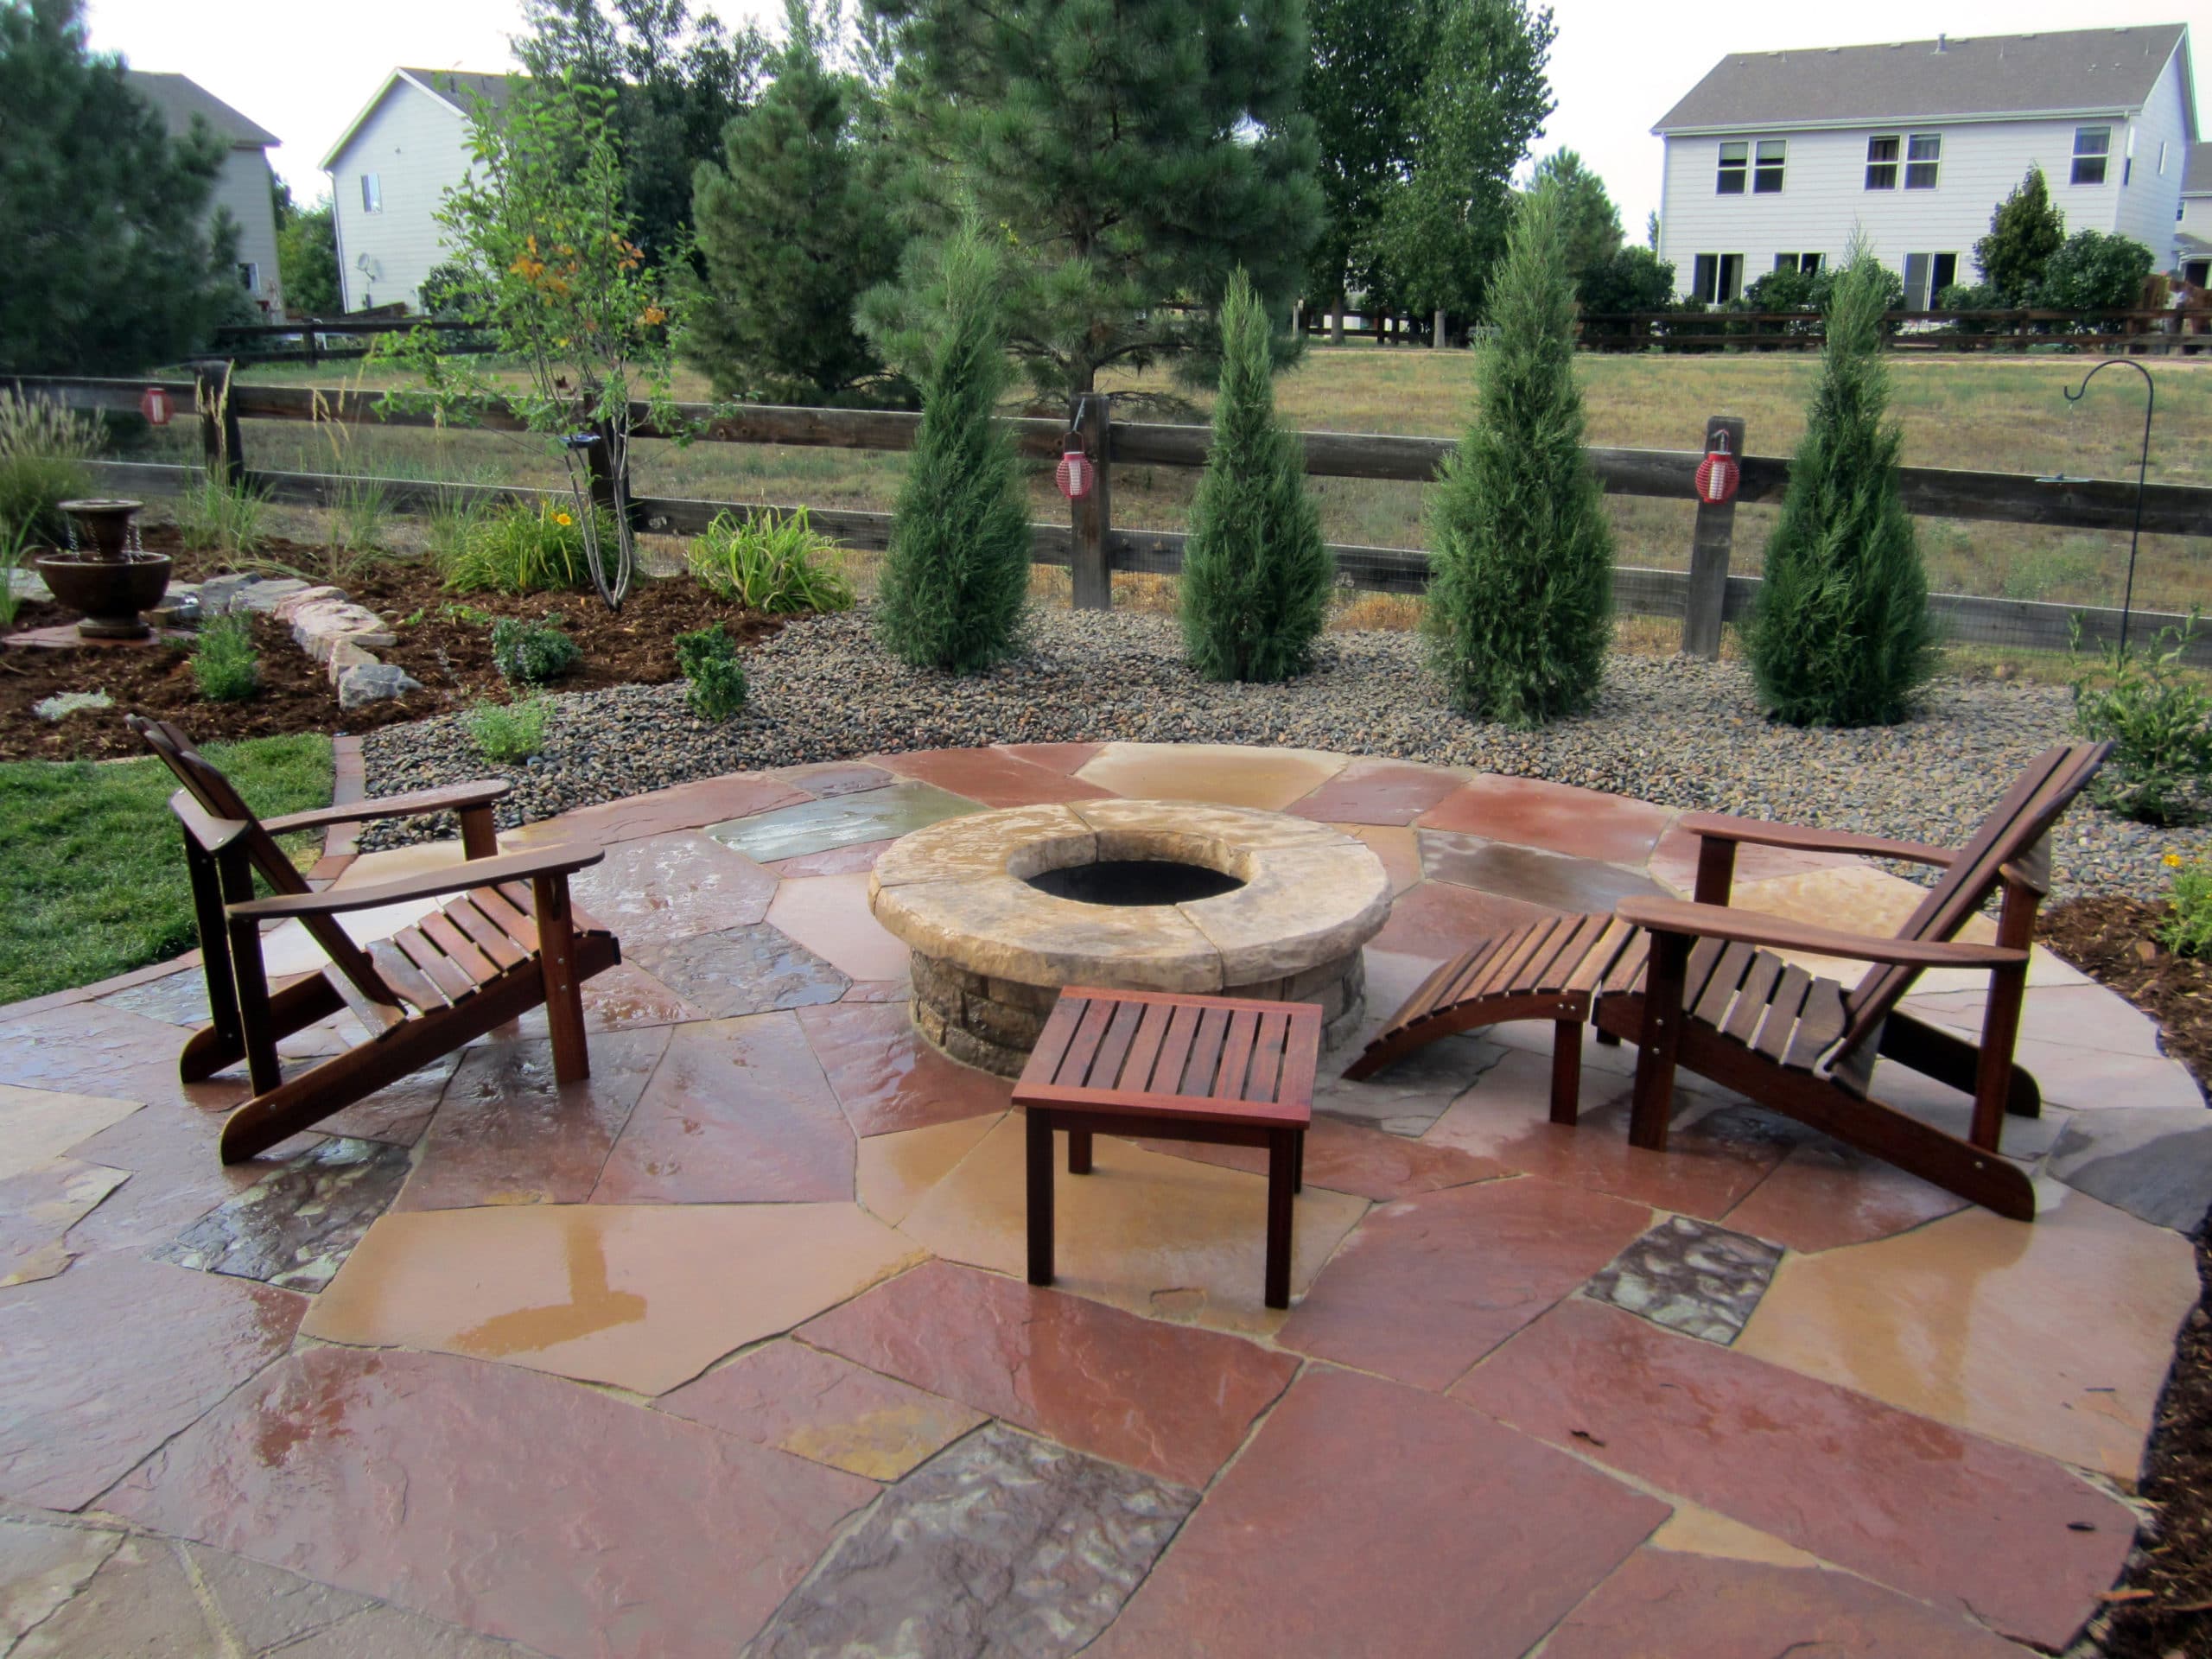 Flat stone patio with flat stone fire pit with seating area.